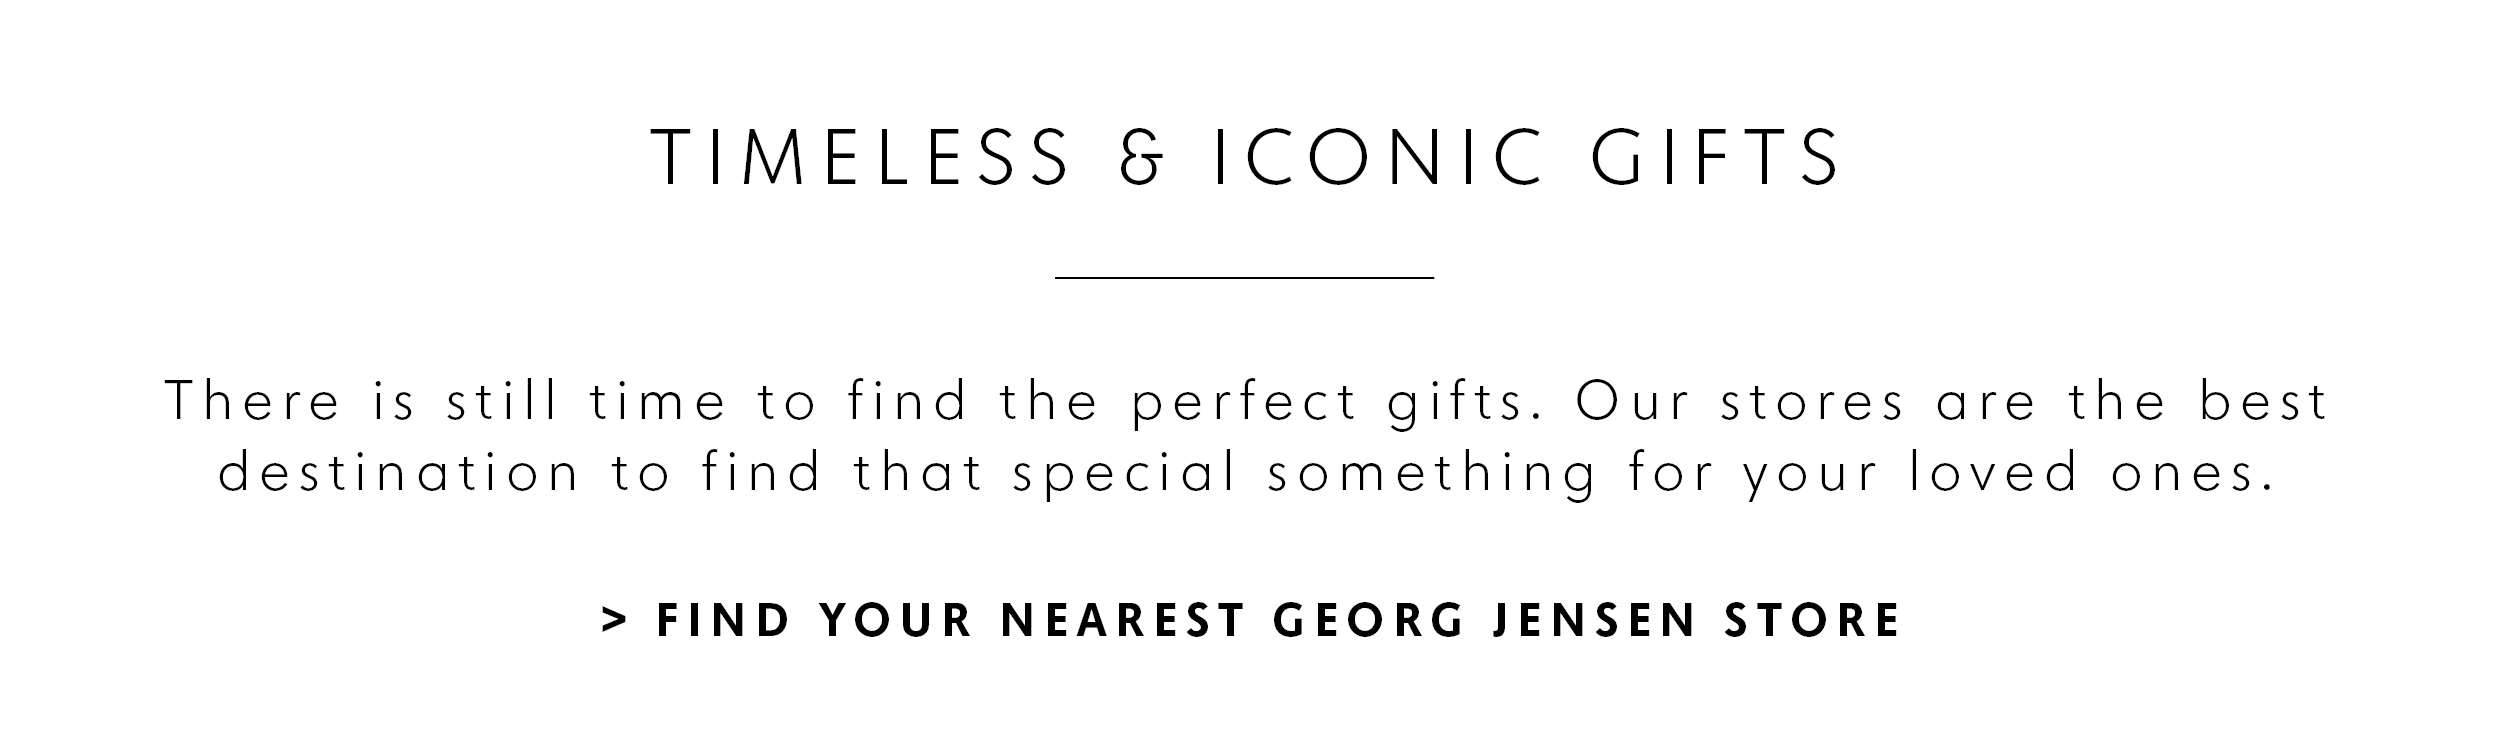 Timeless & iconic gifts 